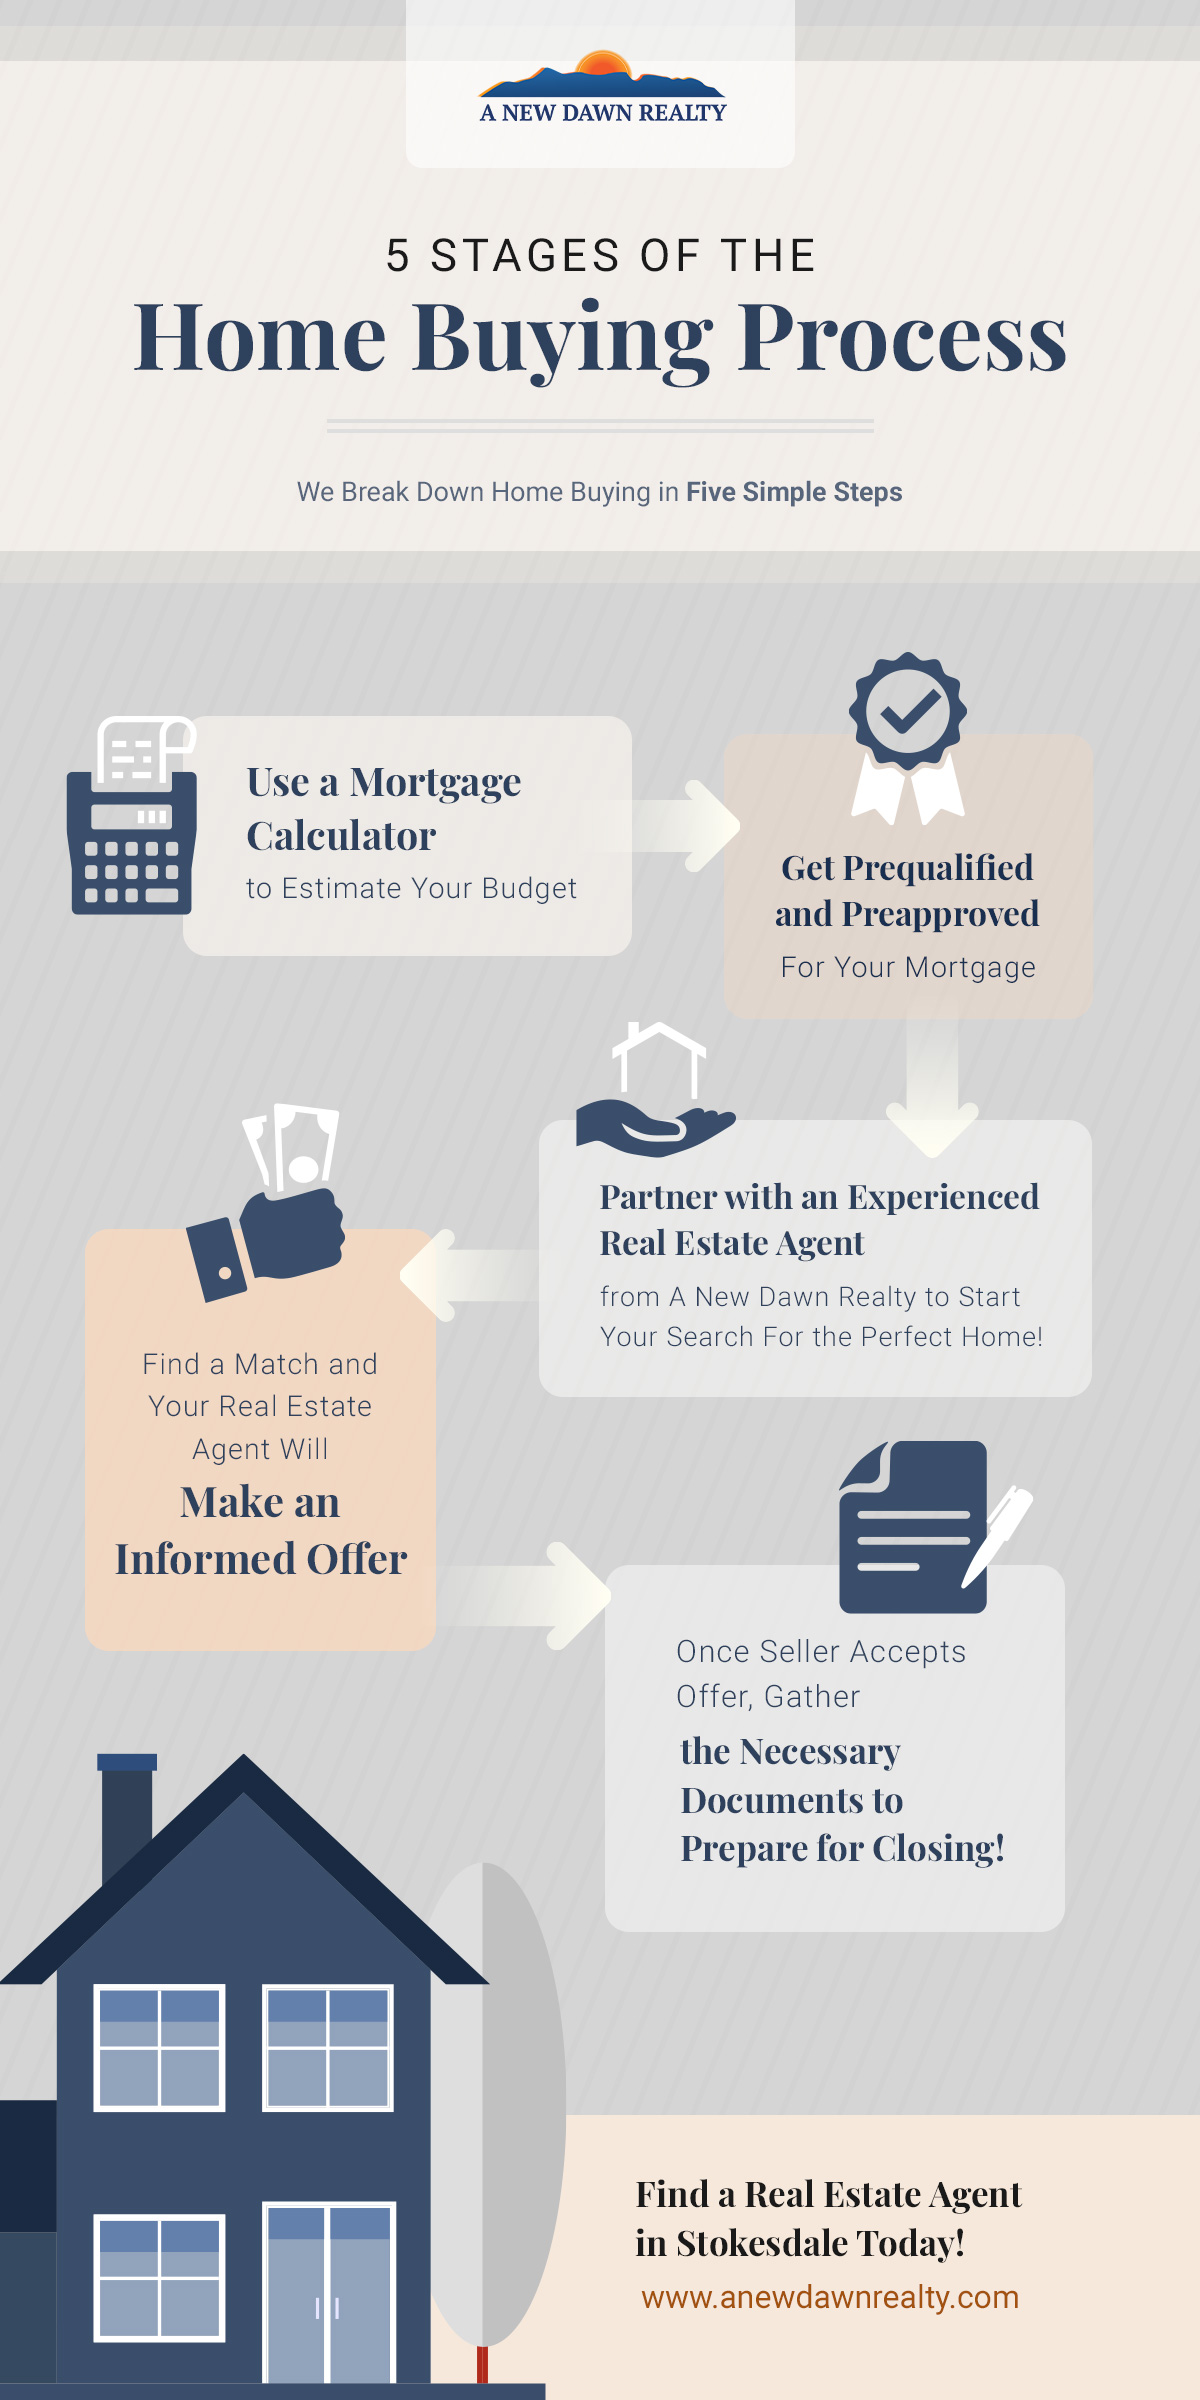 5-Stages-Of-the-Home-Buying-ProcessInfographic-5f19d2bcf33ab